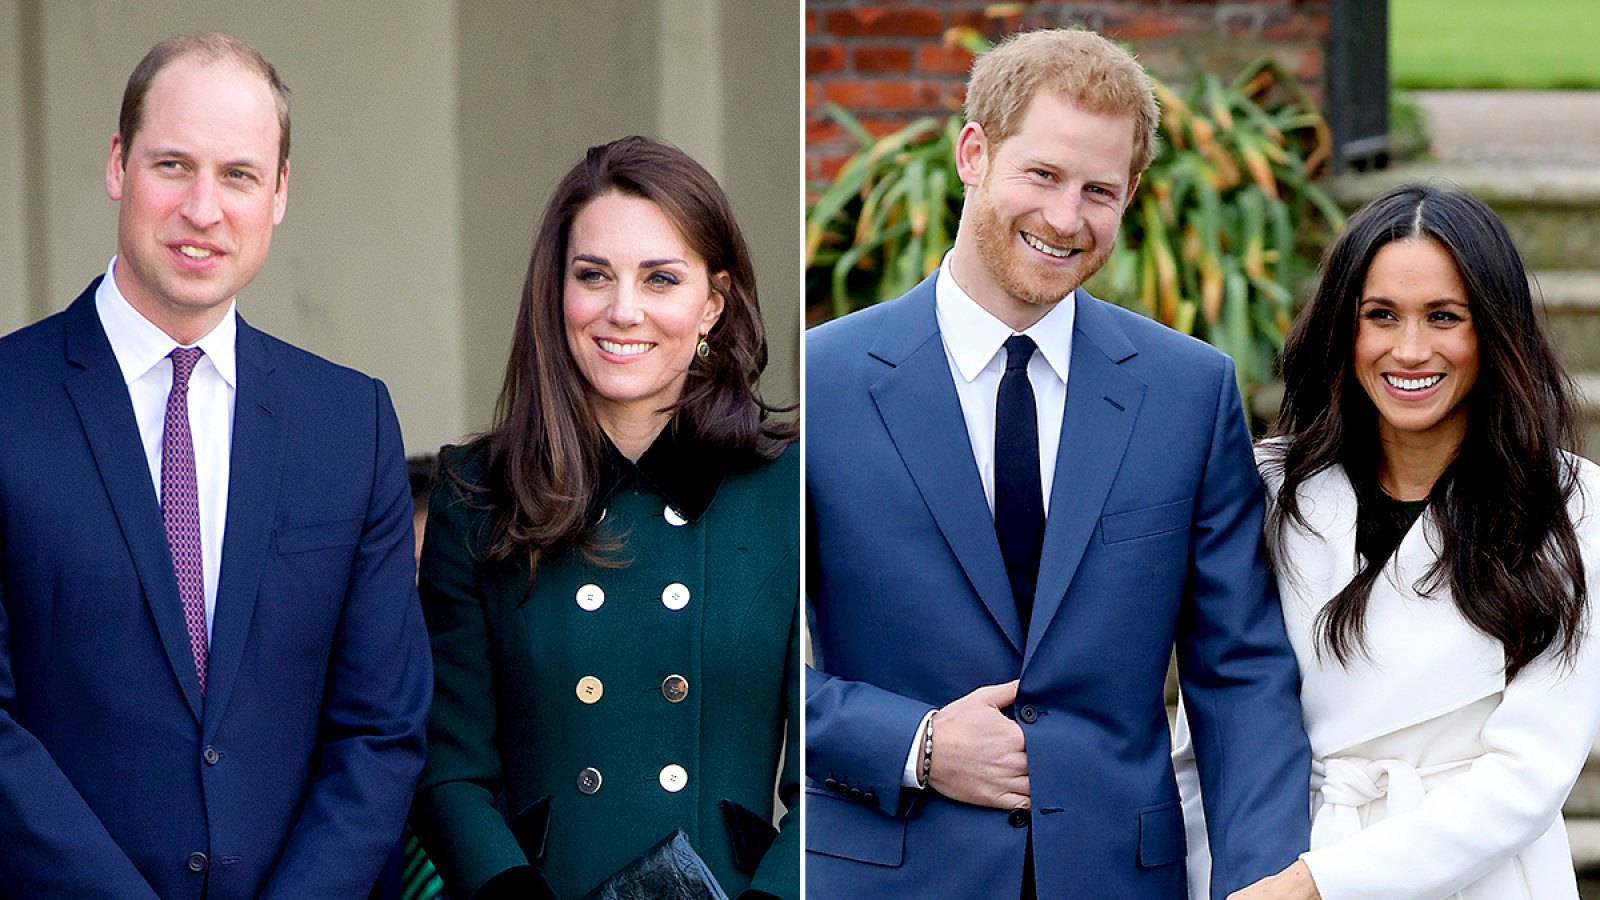 Prince-William-and-Duchess-Kate-Will-Host-Prince-Harry-and-Meghan-Markle-Over-the-Holidays